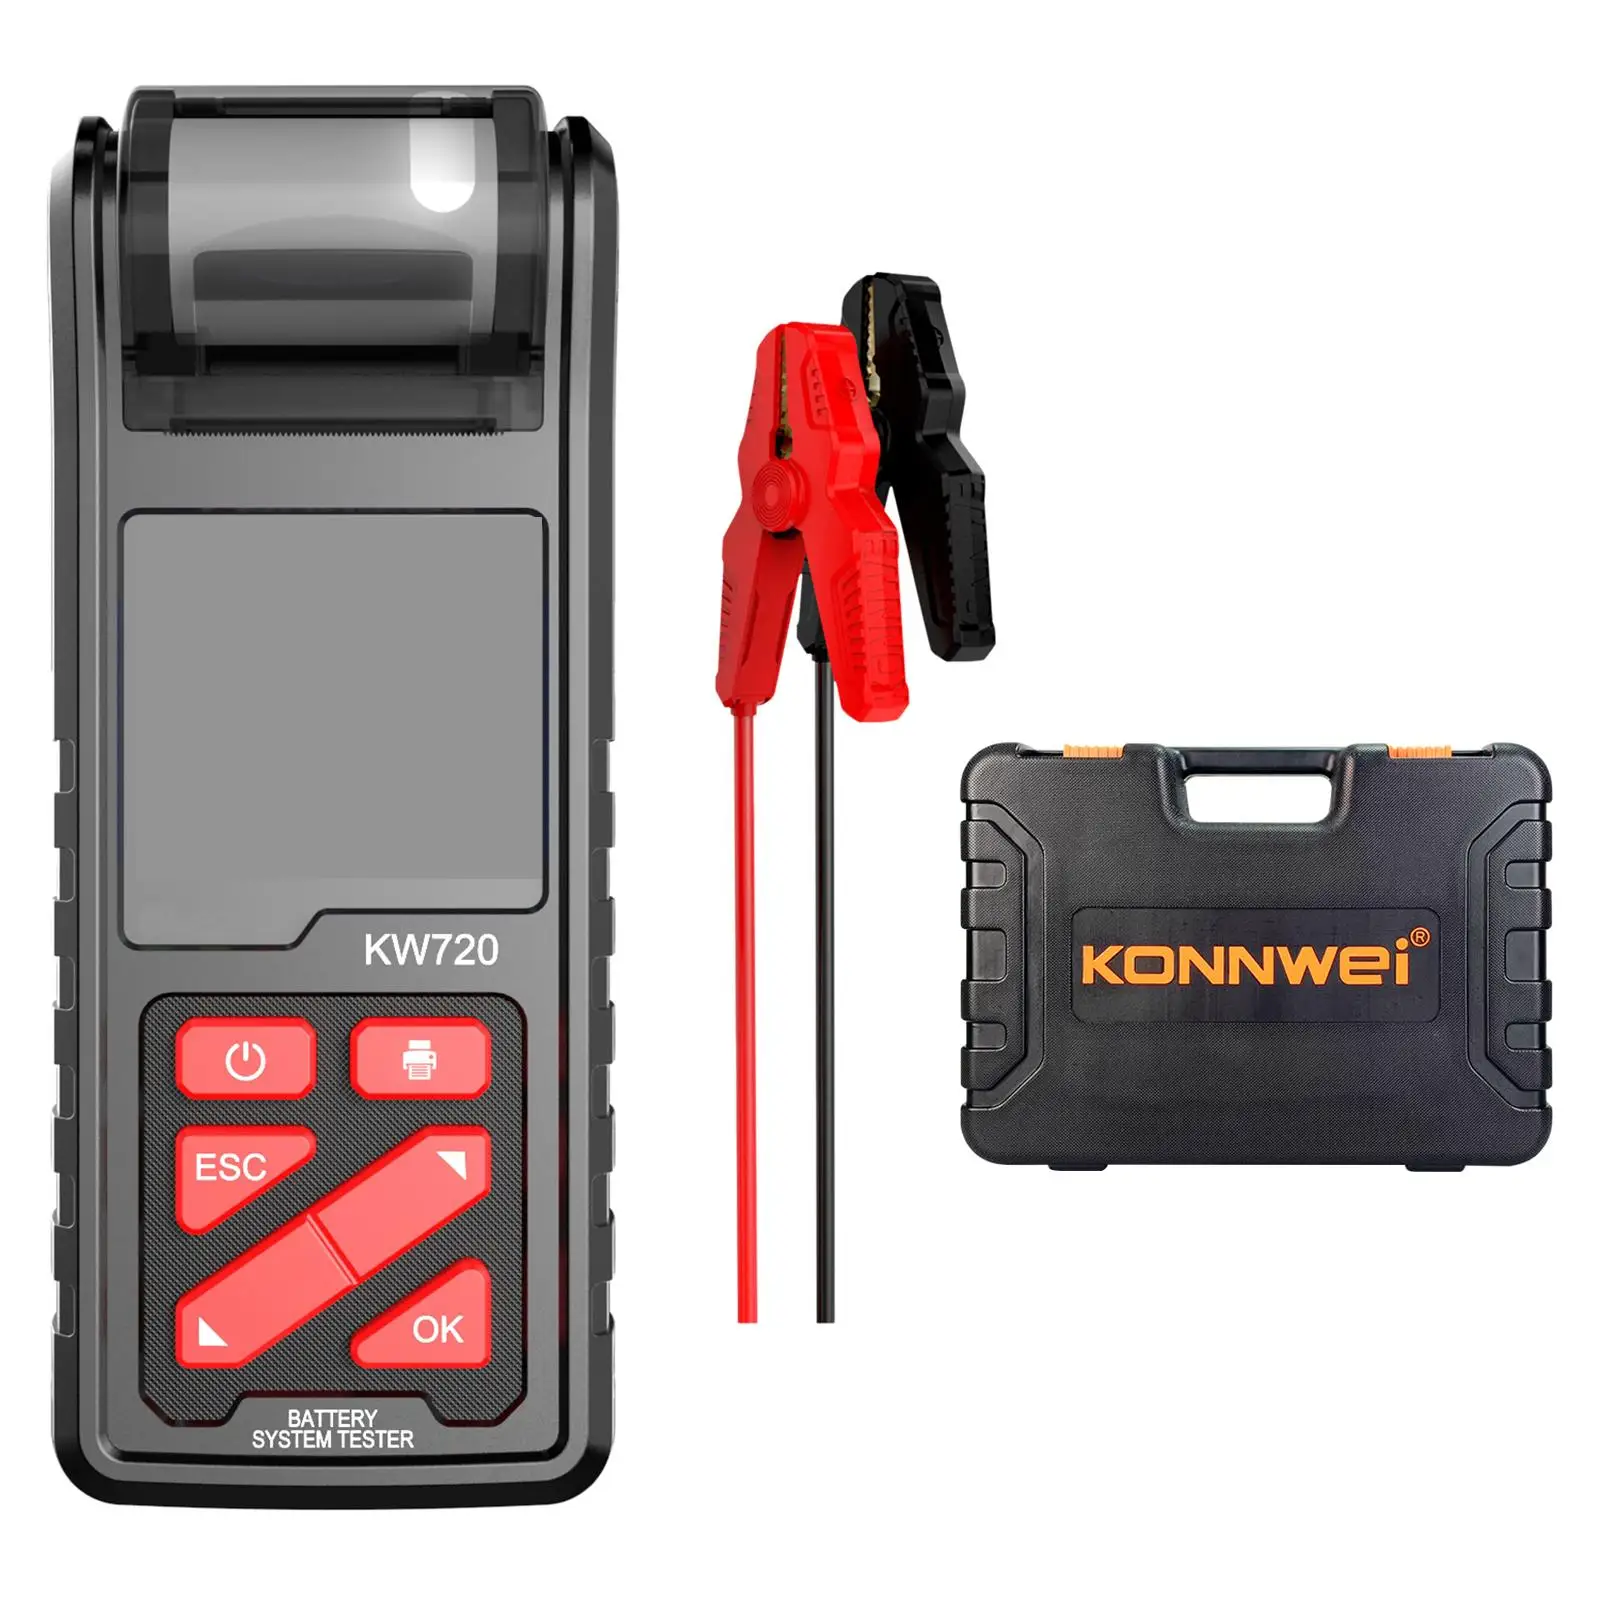 KW720 Car Battery Tester with Printer 6V 12V 24V Charging Test Tool Auto Battery Analyzer for Cars Marine Boats Truck